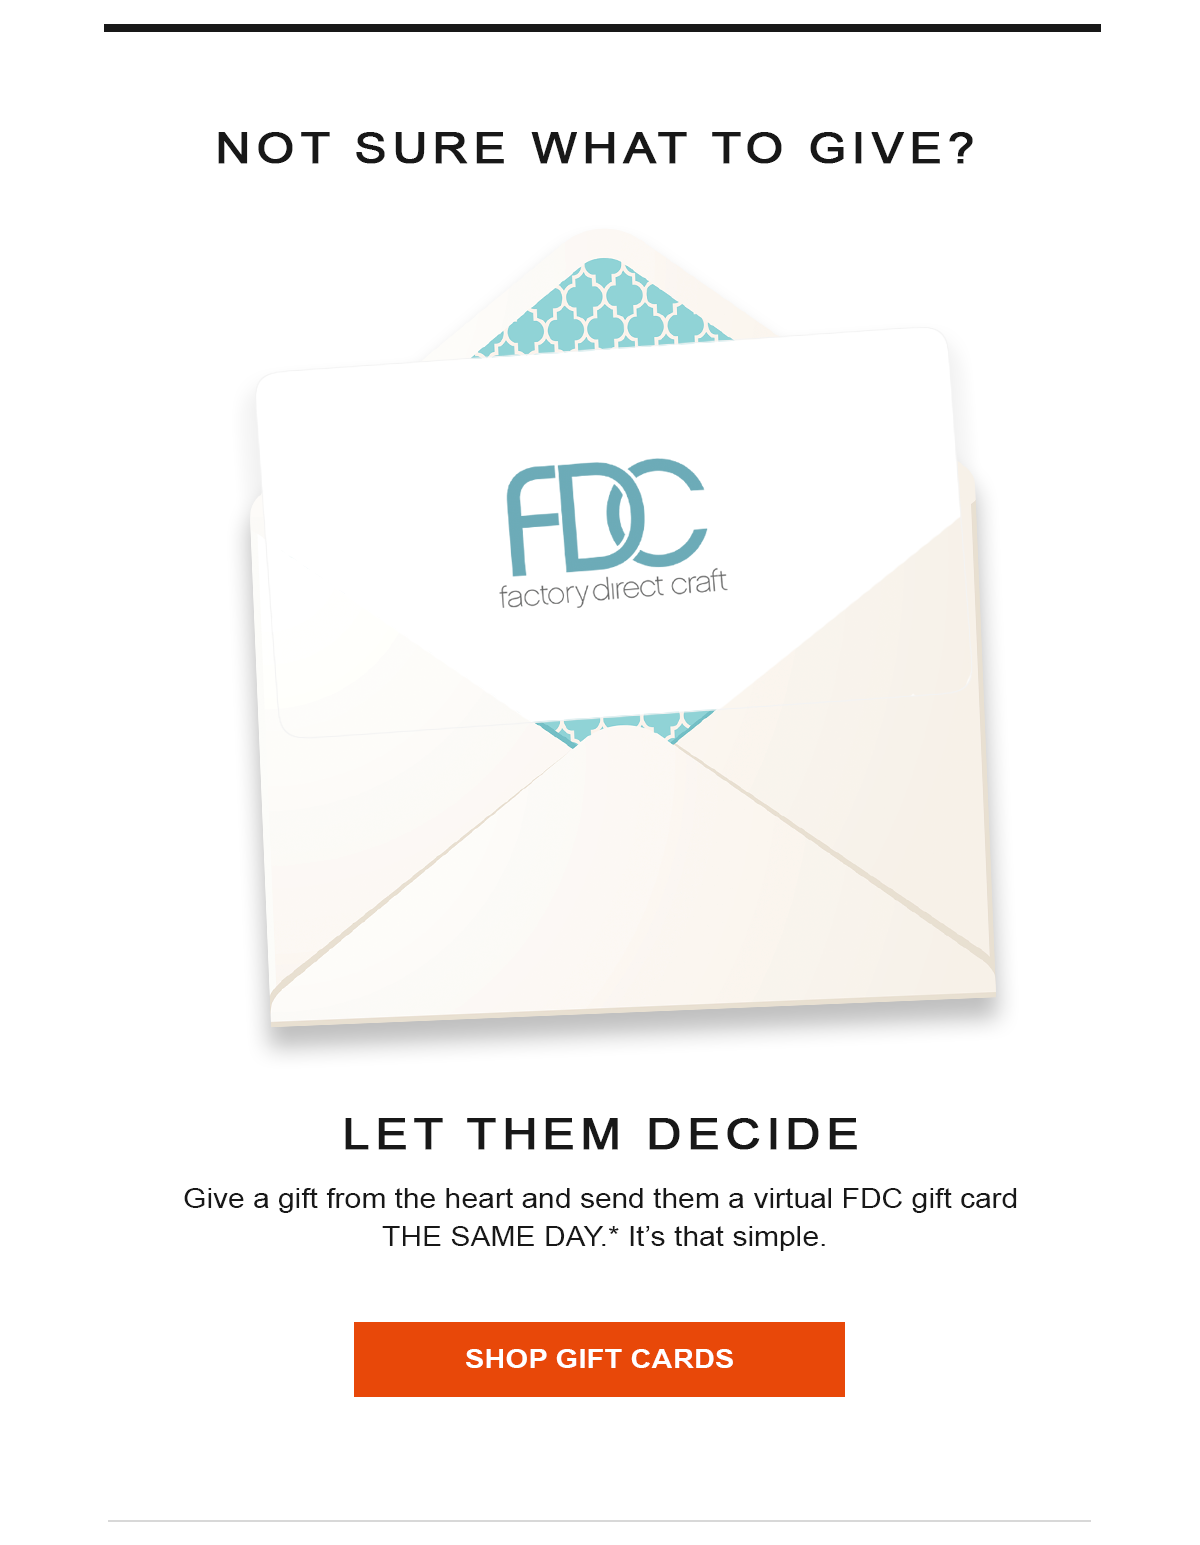 Not sure what to give?  Let them decide.  Give a gift from the heart and send them a virtual FDC gift card THE SAME DAY.* It's that simple.  Shop Gift Cards